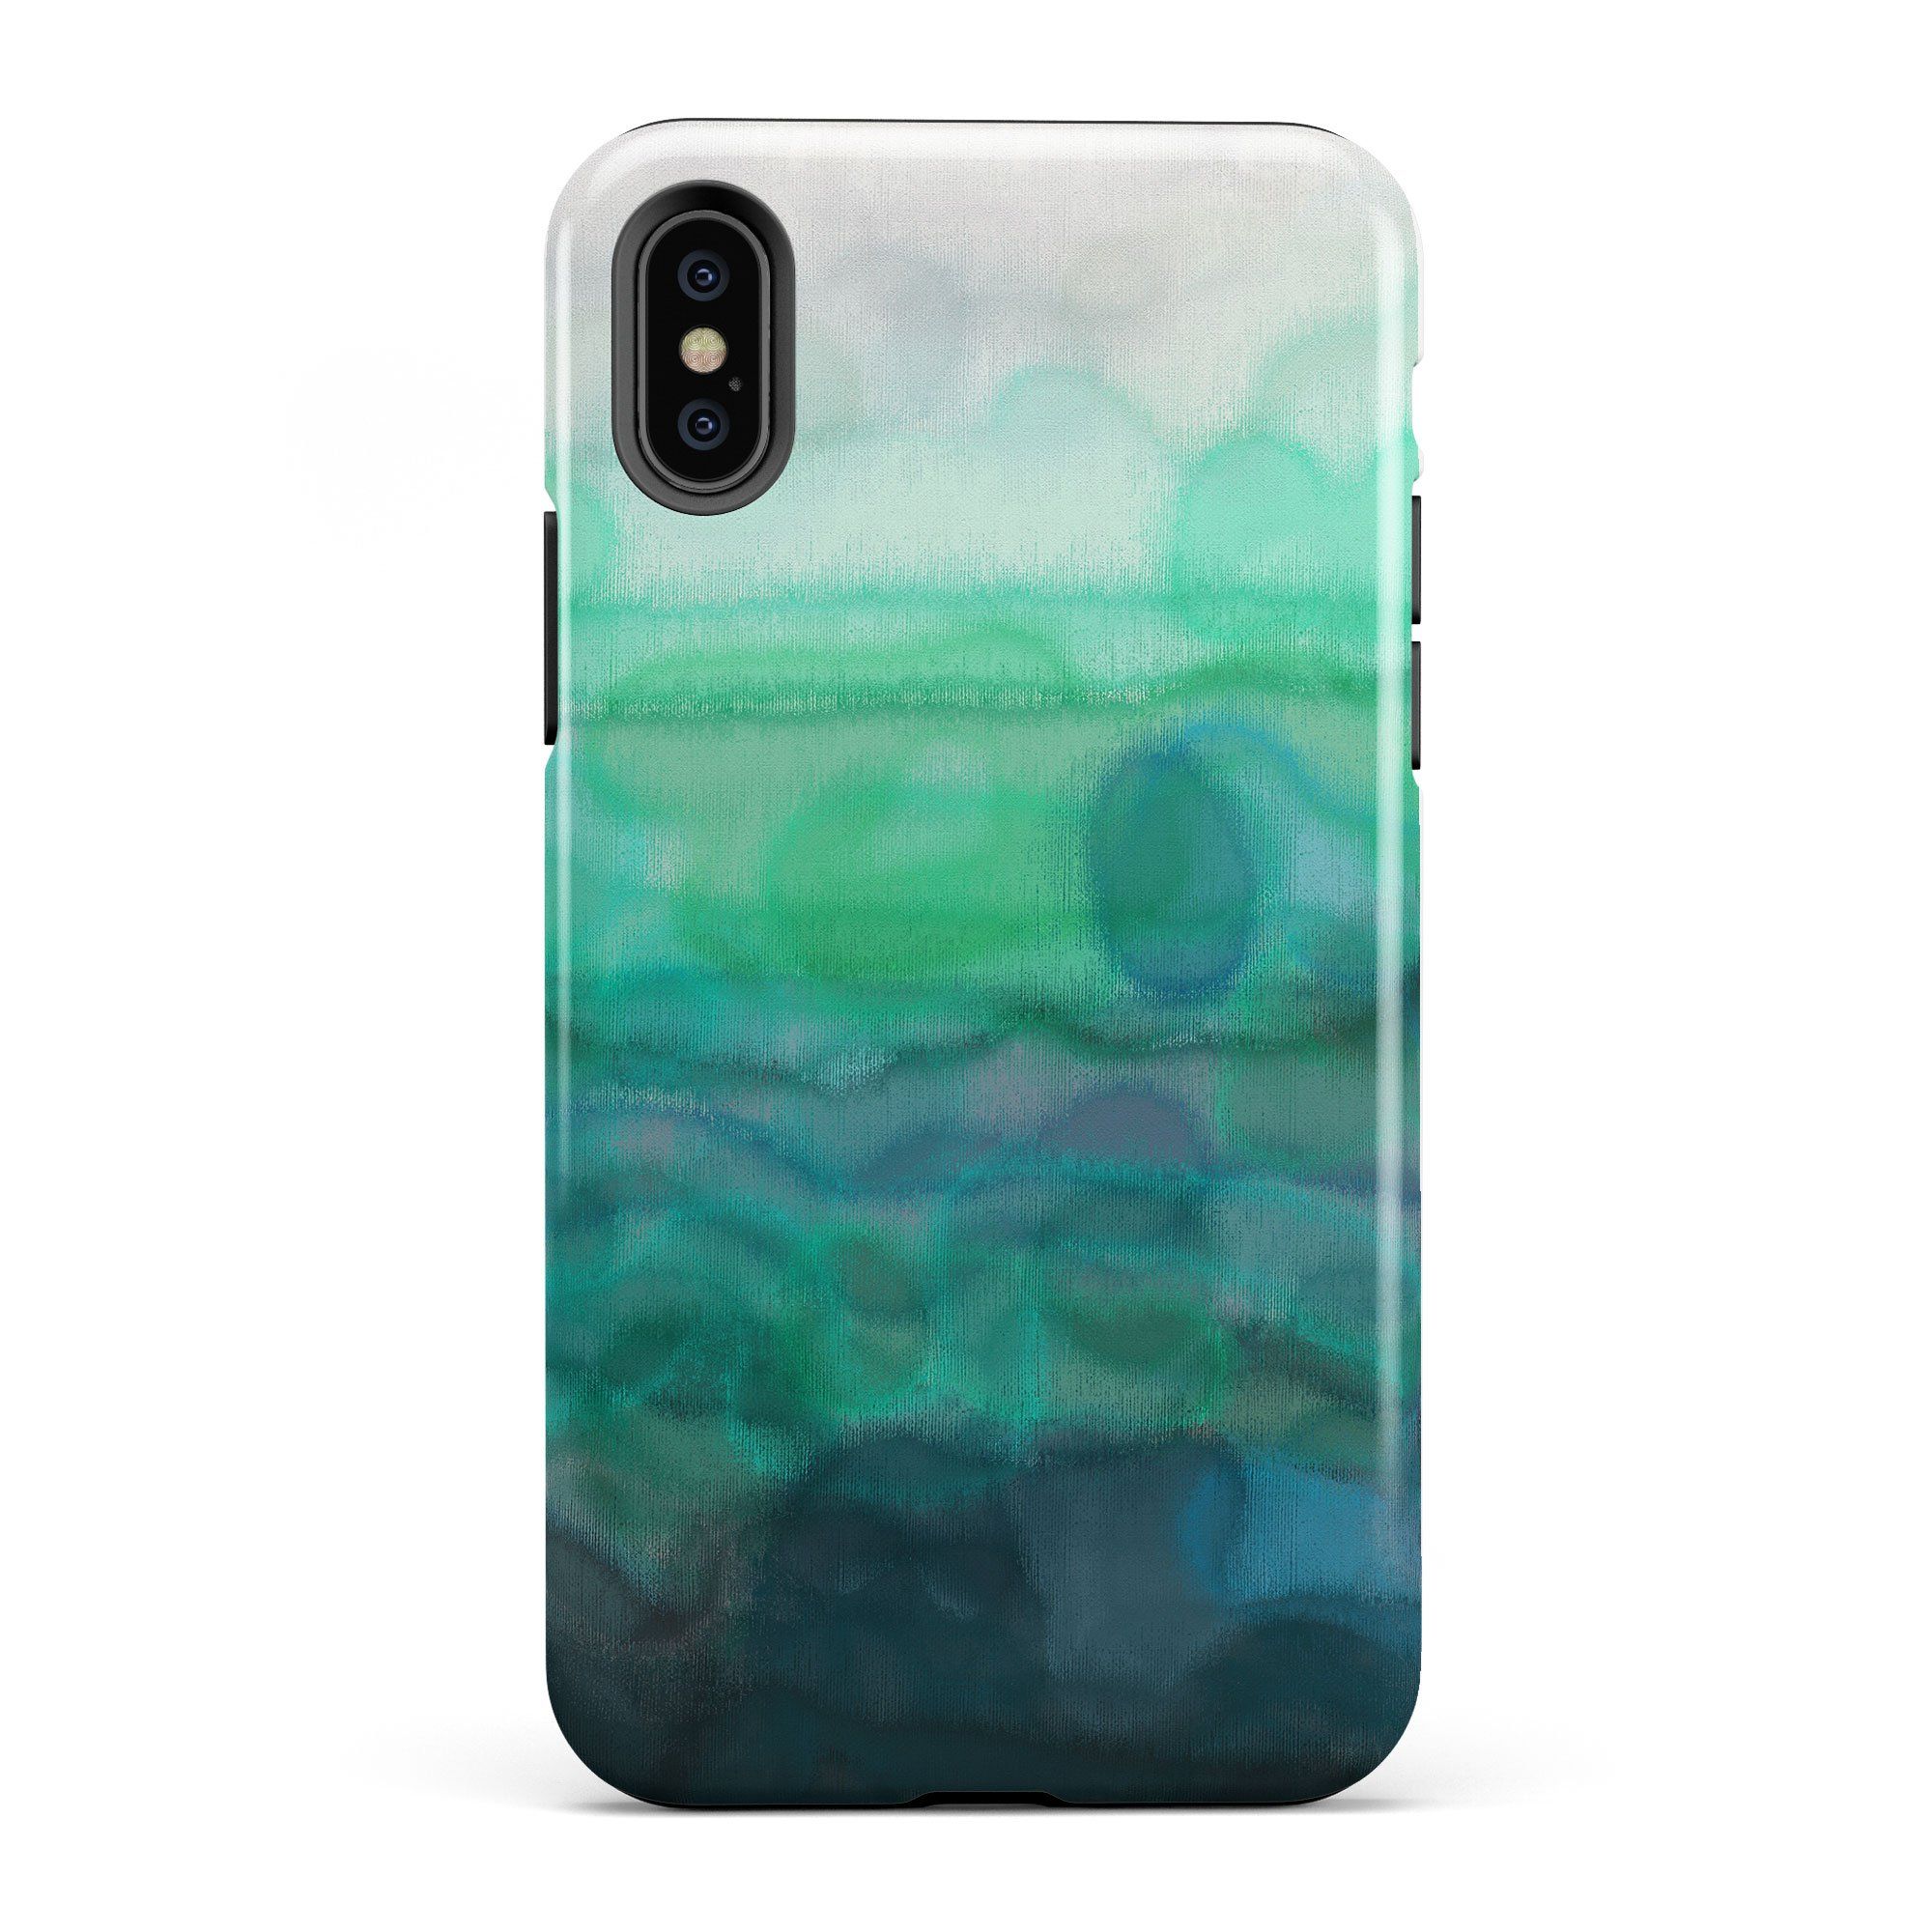 Teal 'Serenity' iPhone Case - Louise Mead